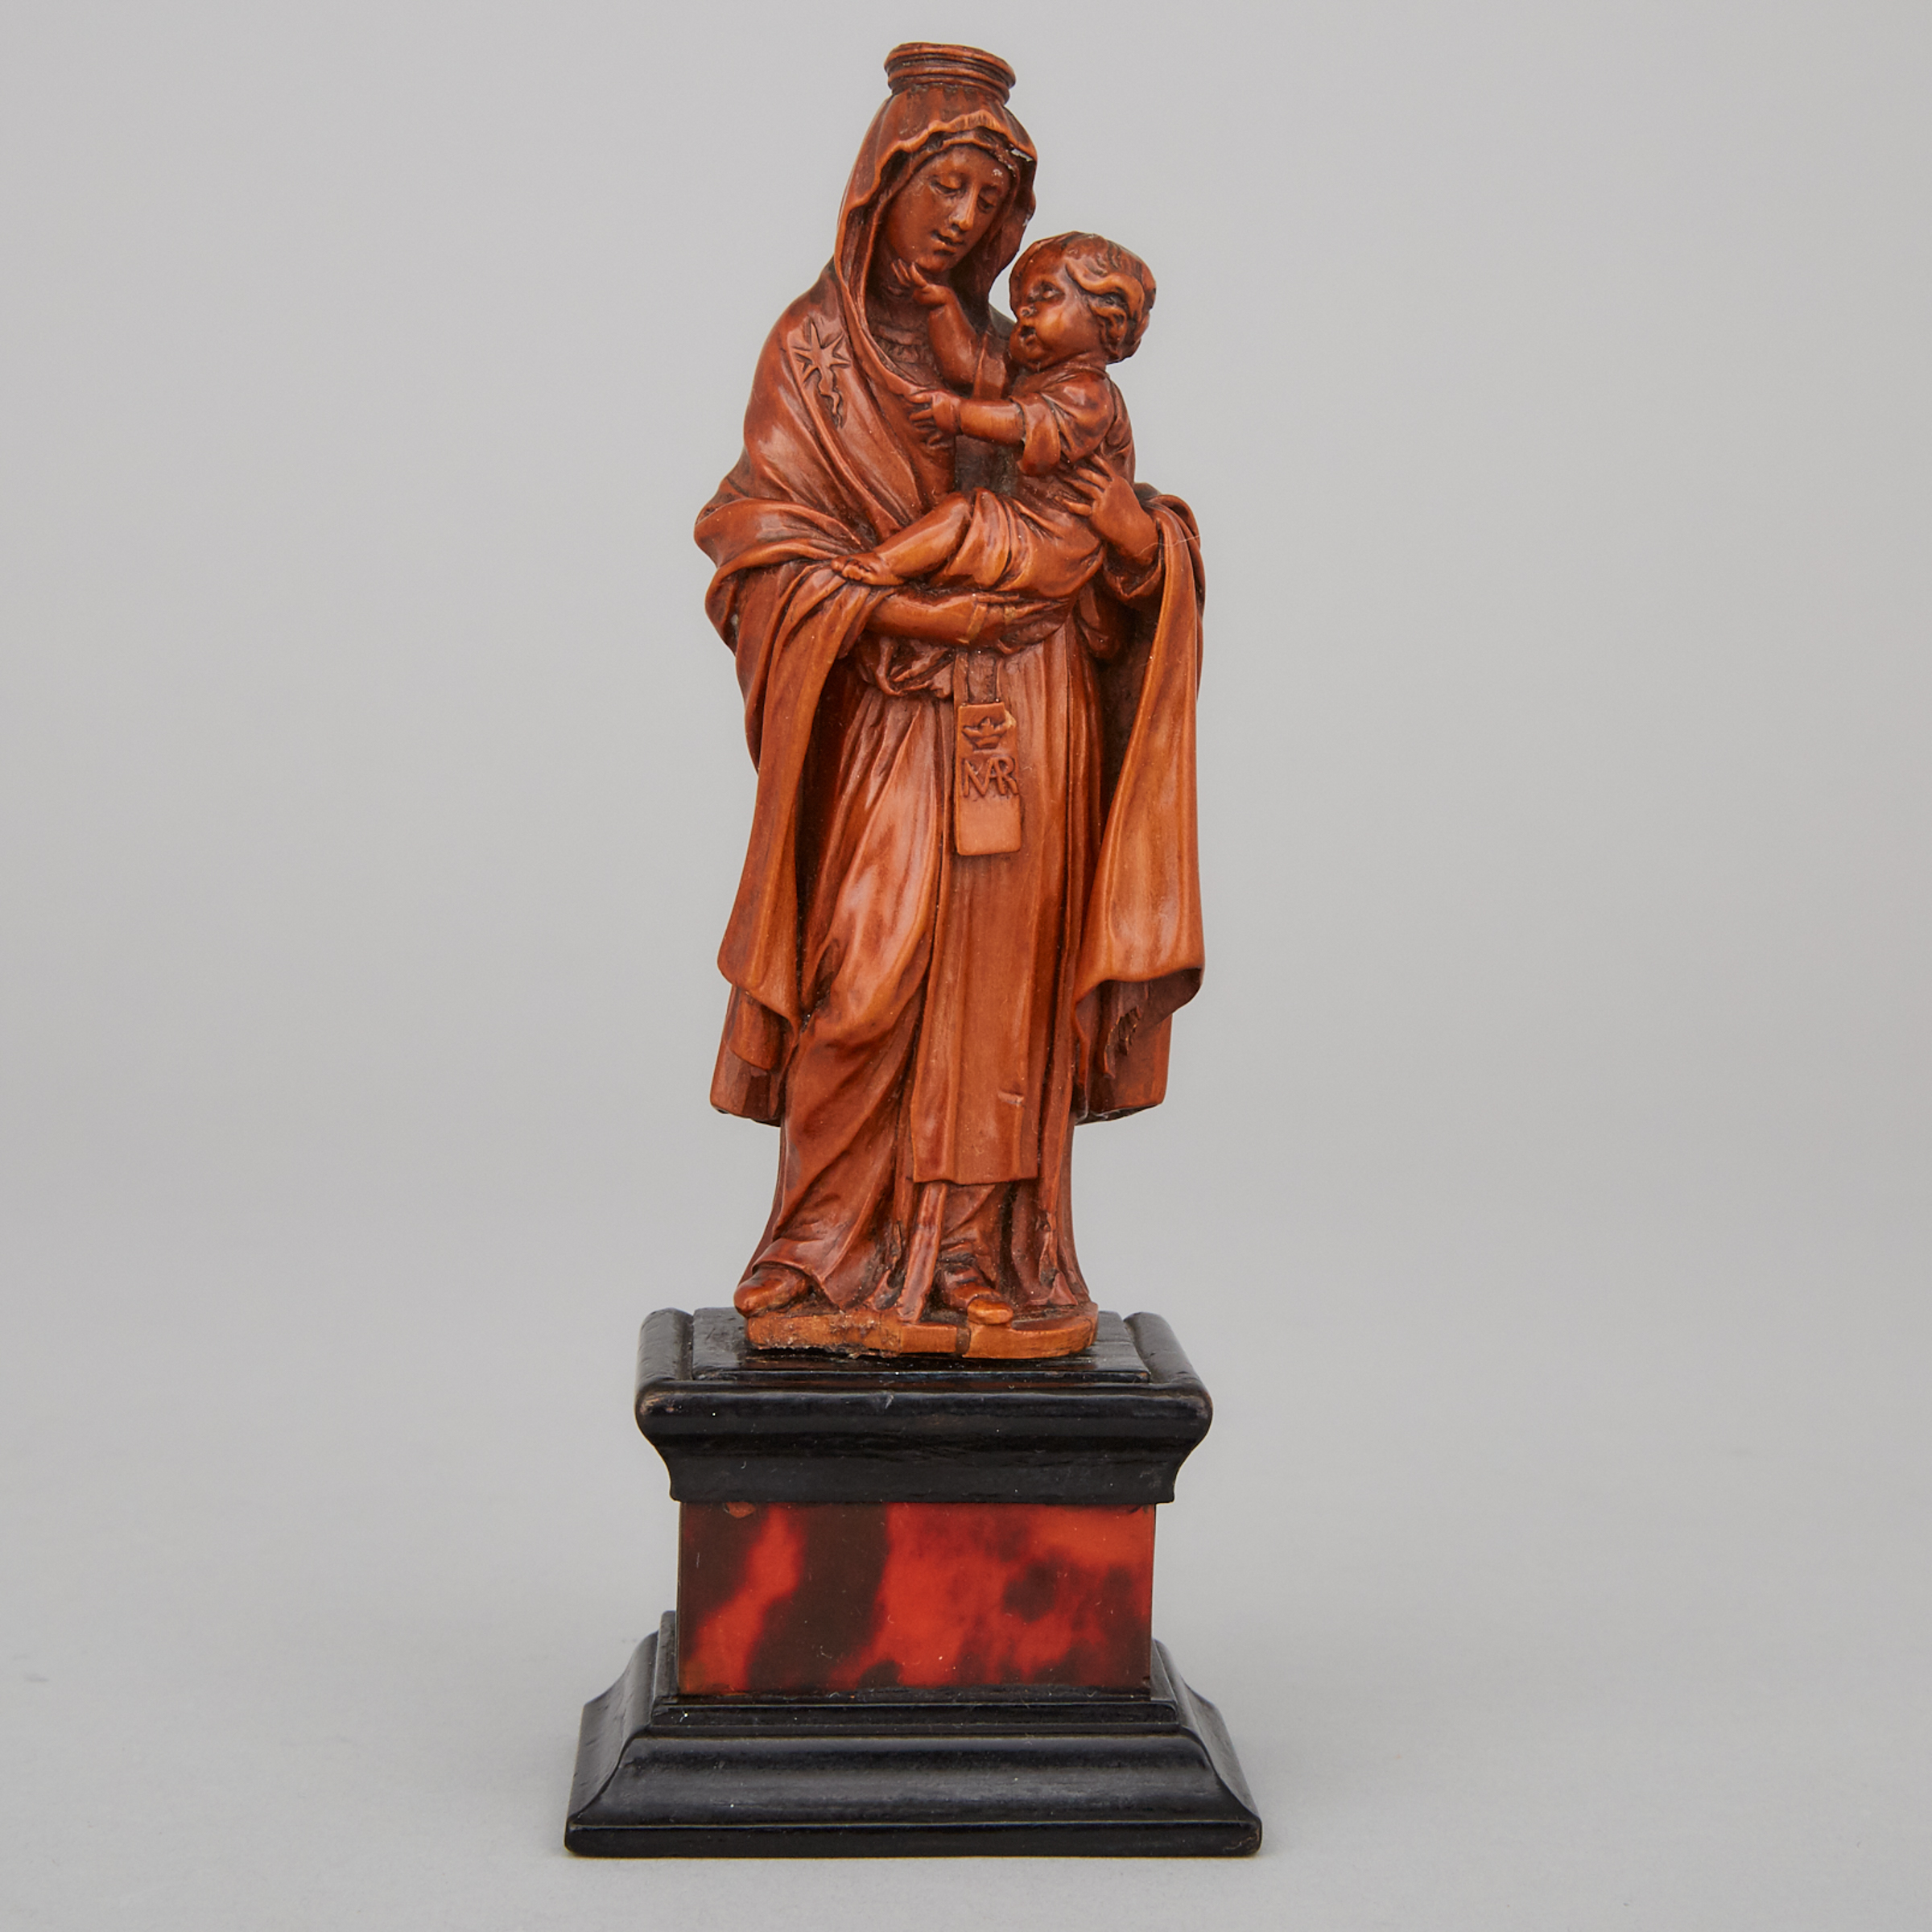 Flemish Boxwood Group of the Virgin and Child, 17th/18th century